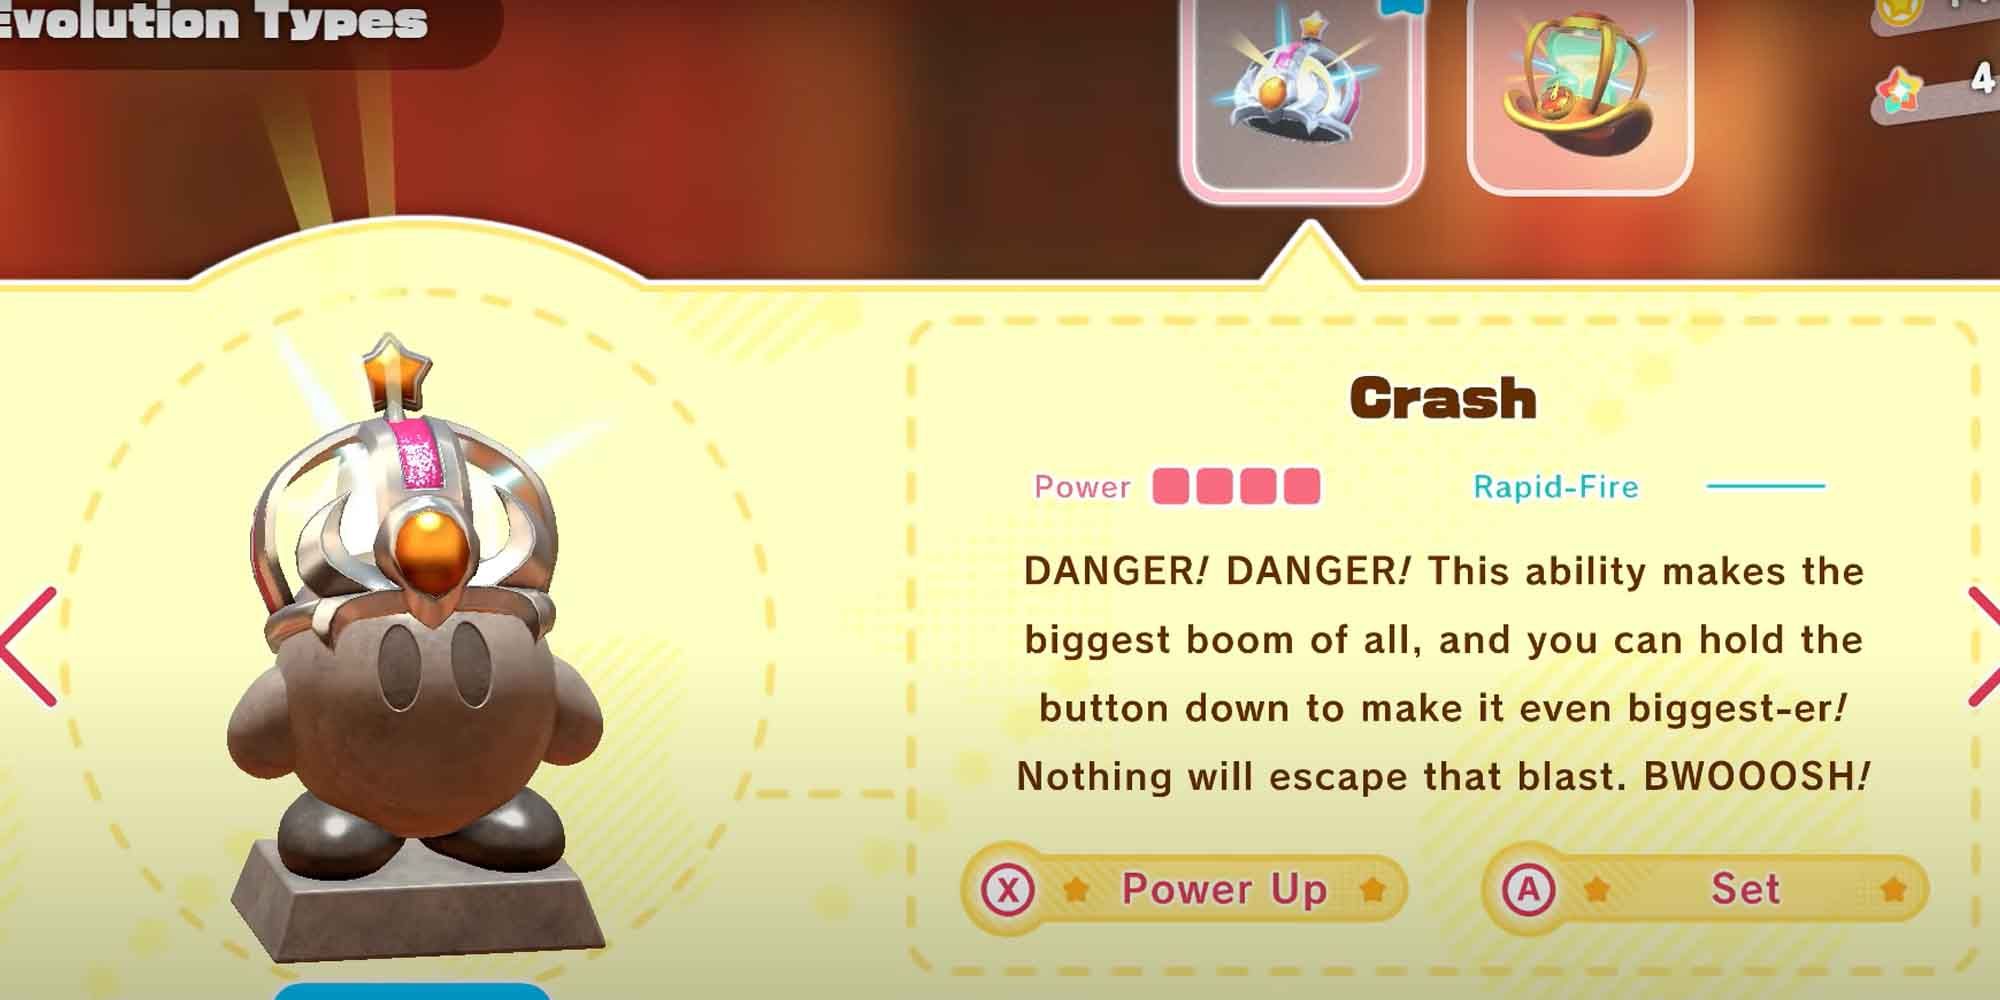 The Crash copy ability in Kirby in The Forgotten Land